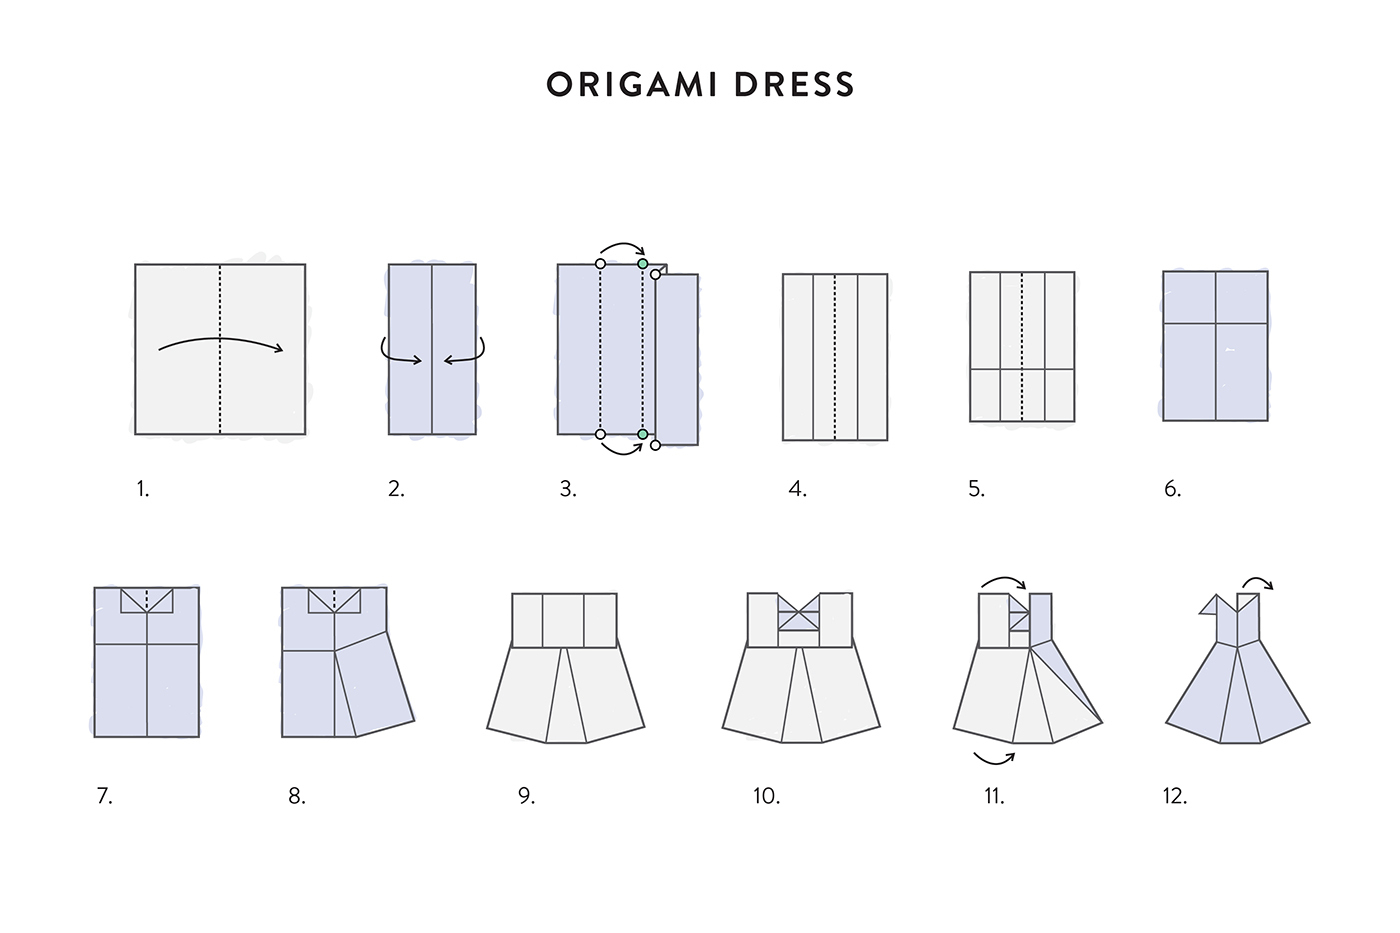 How To Fold A Shirt Origami Diy Birthday Party Decorations Origami Clothes Everywhere